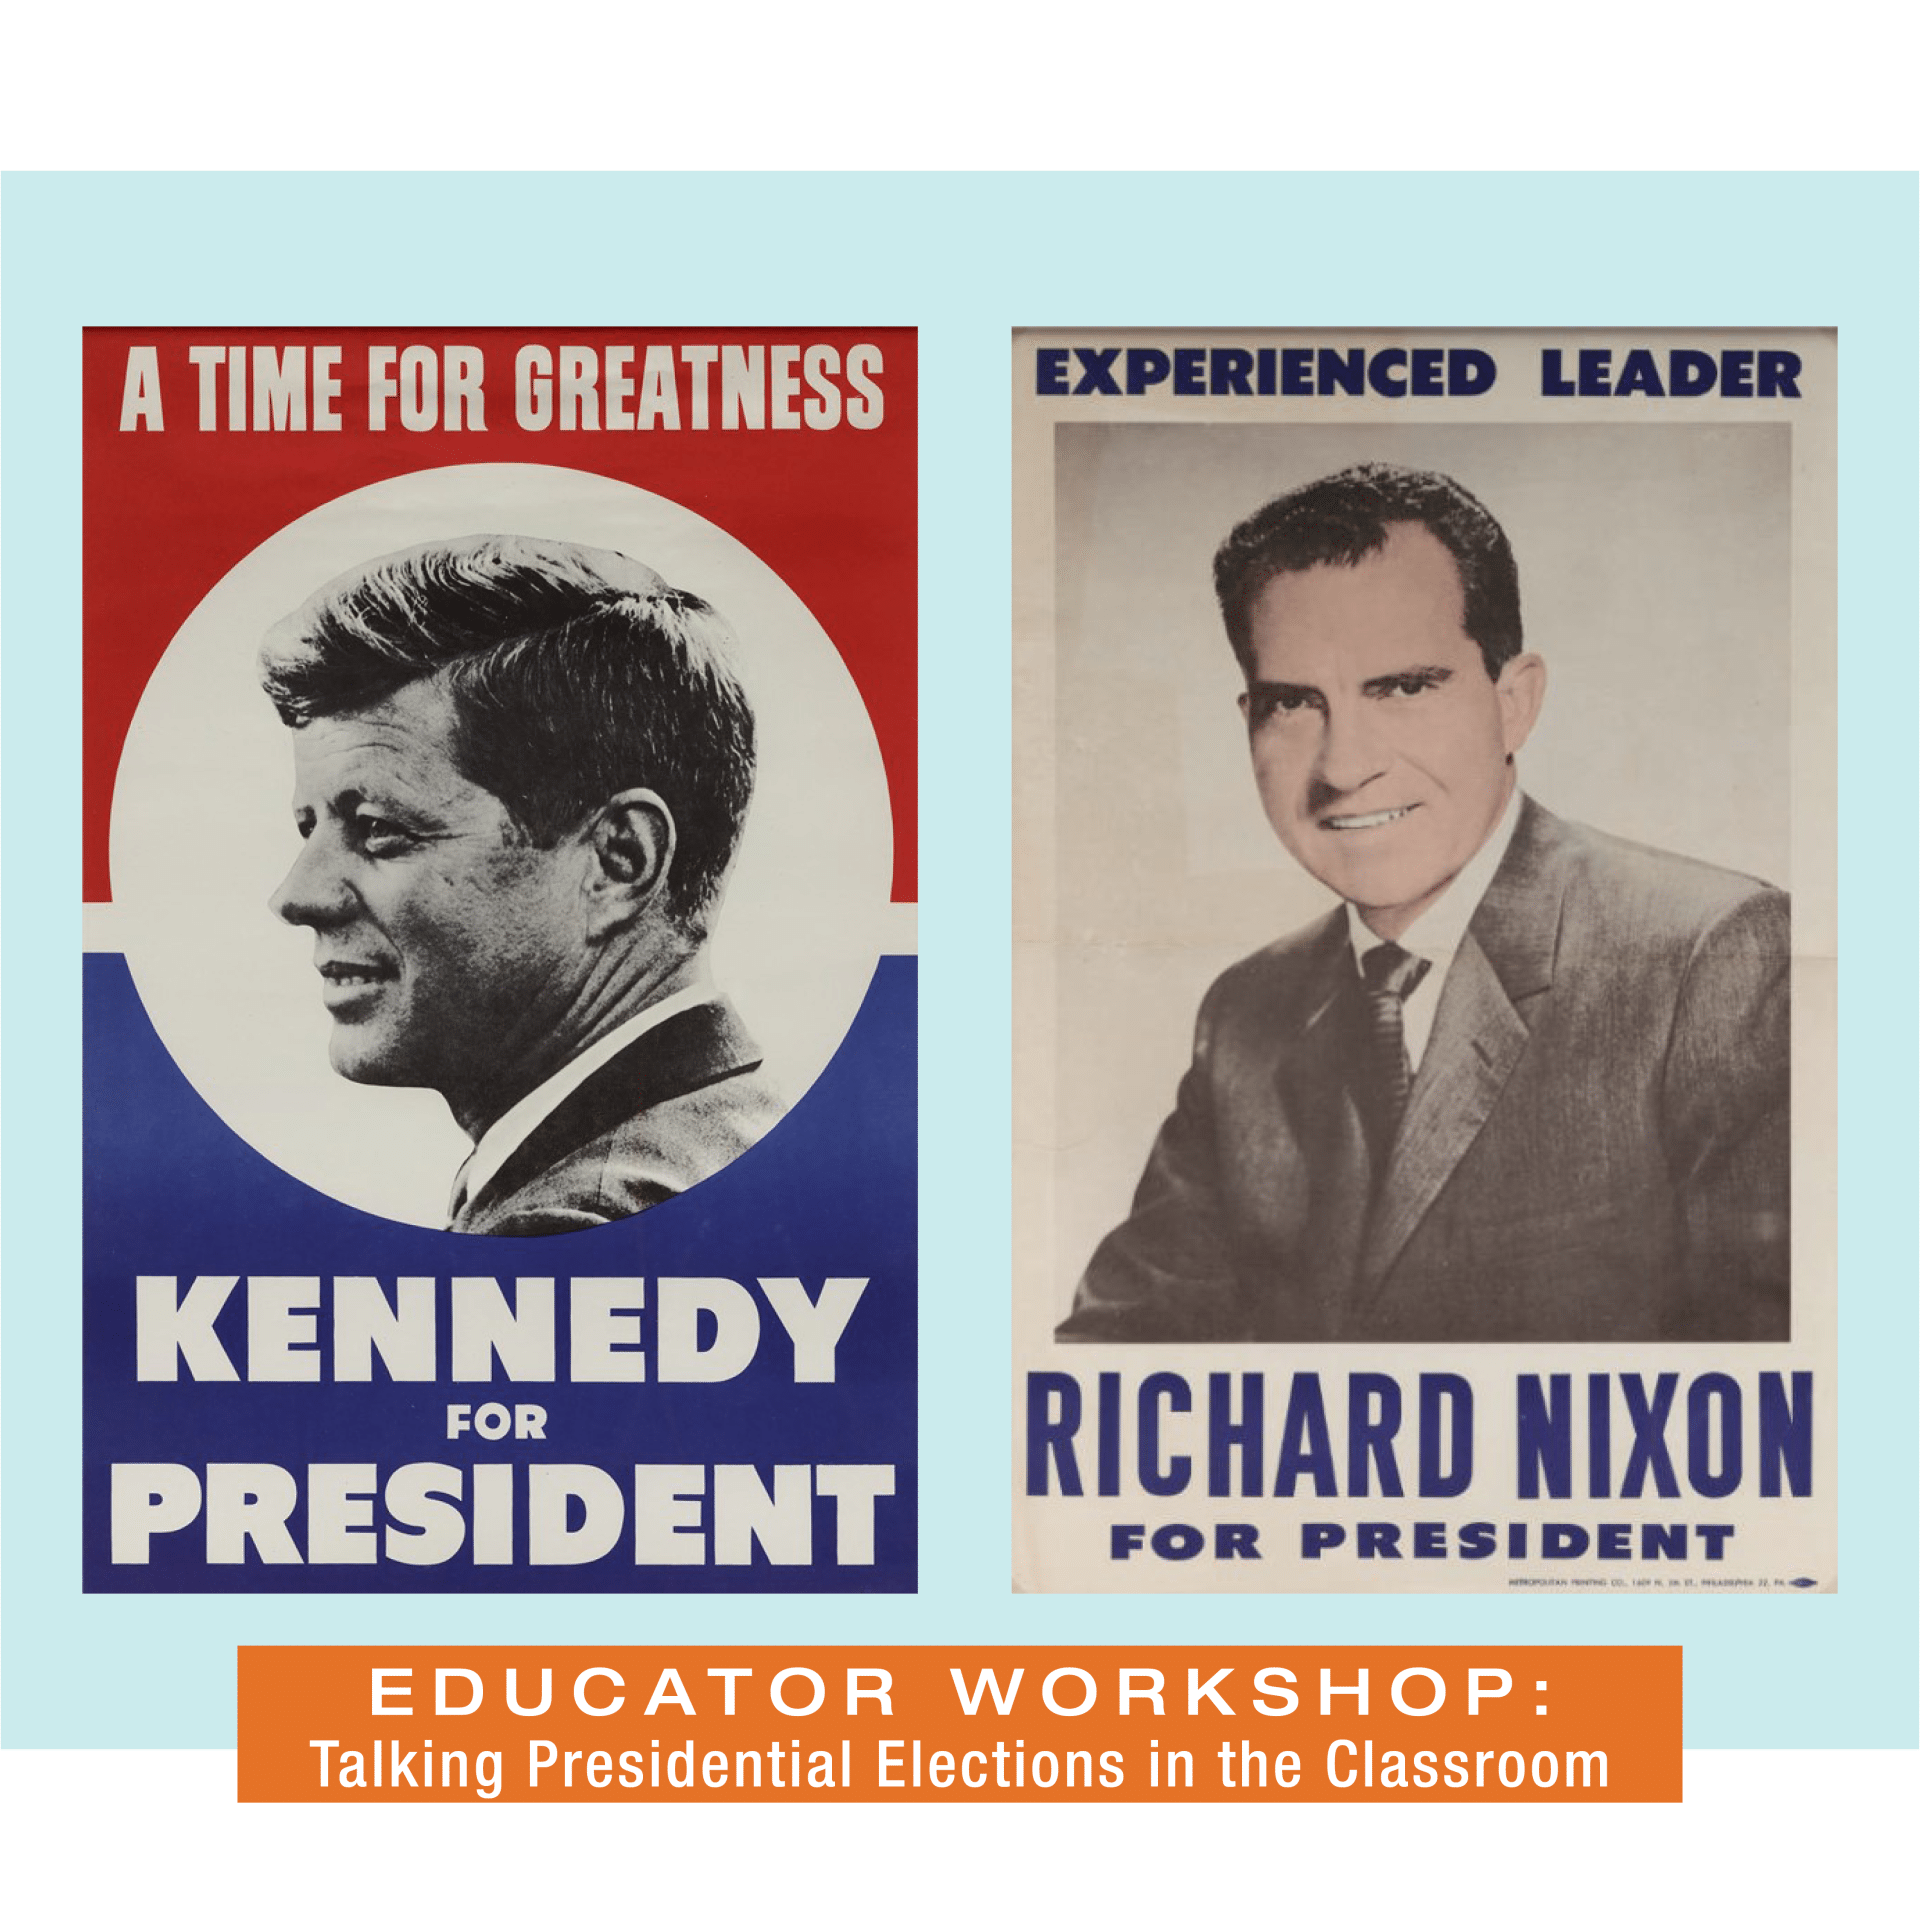 1960 election posters Kennedy and Nixon for professional development event